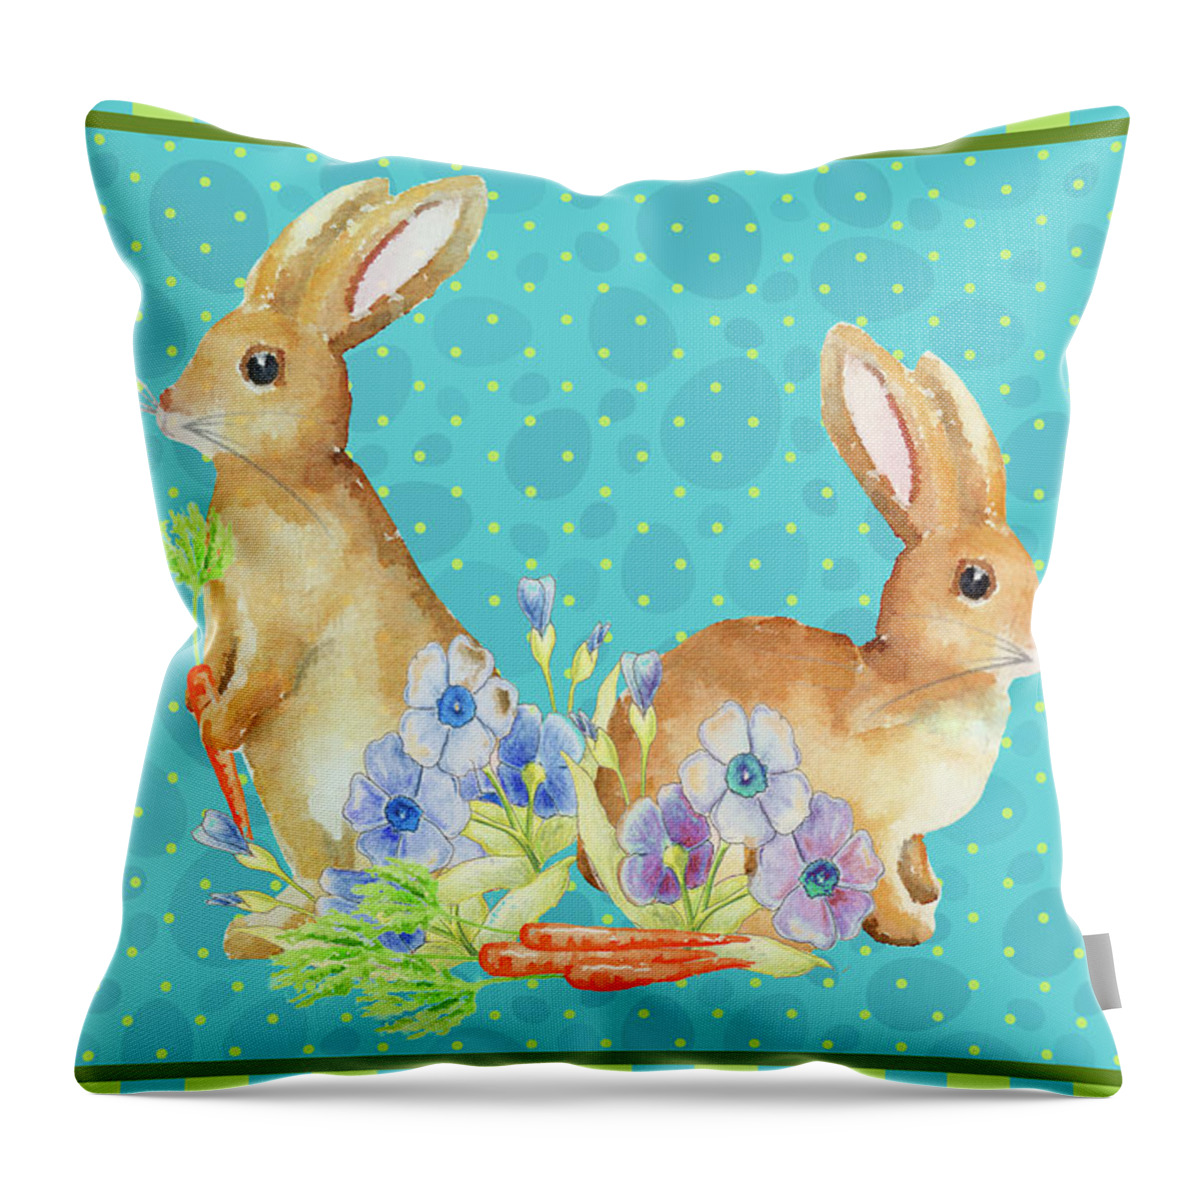 Bunny Throw Pillow featuring the mixed media Bunny Pair II by Andi Metz